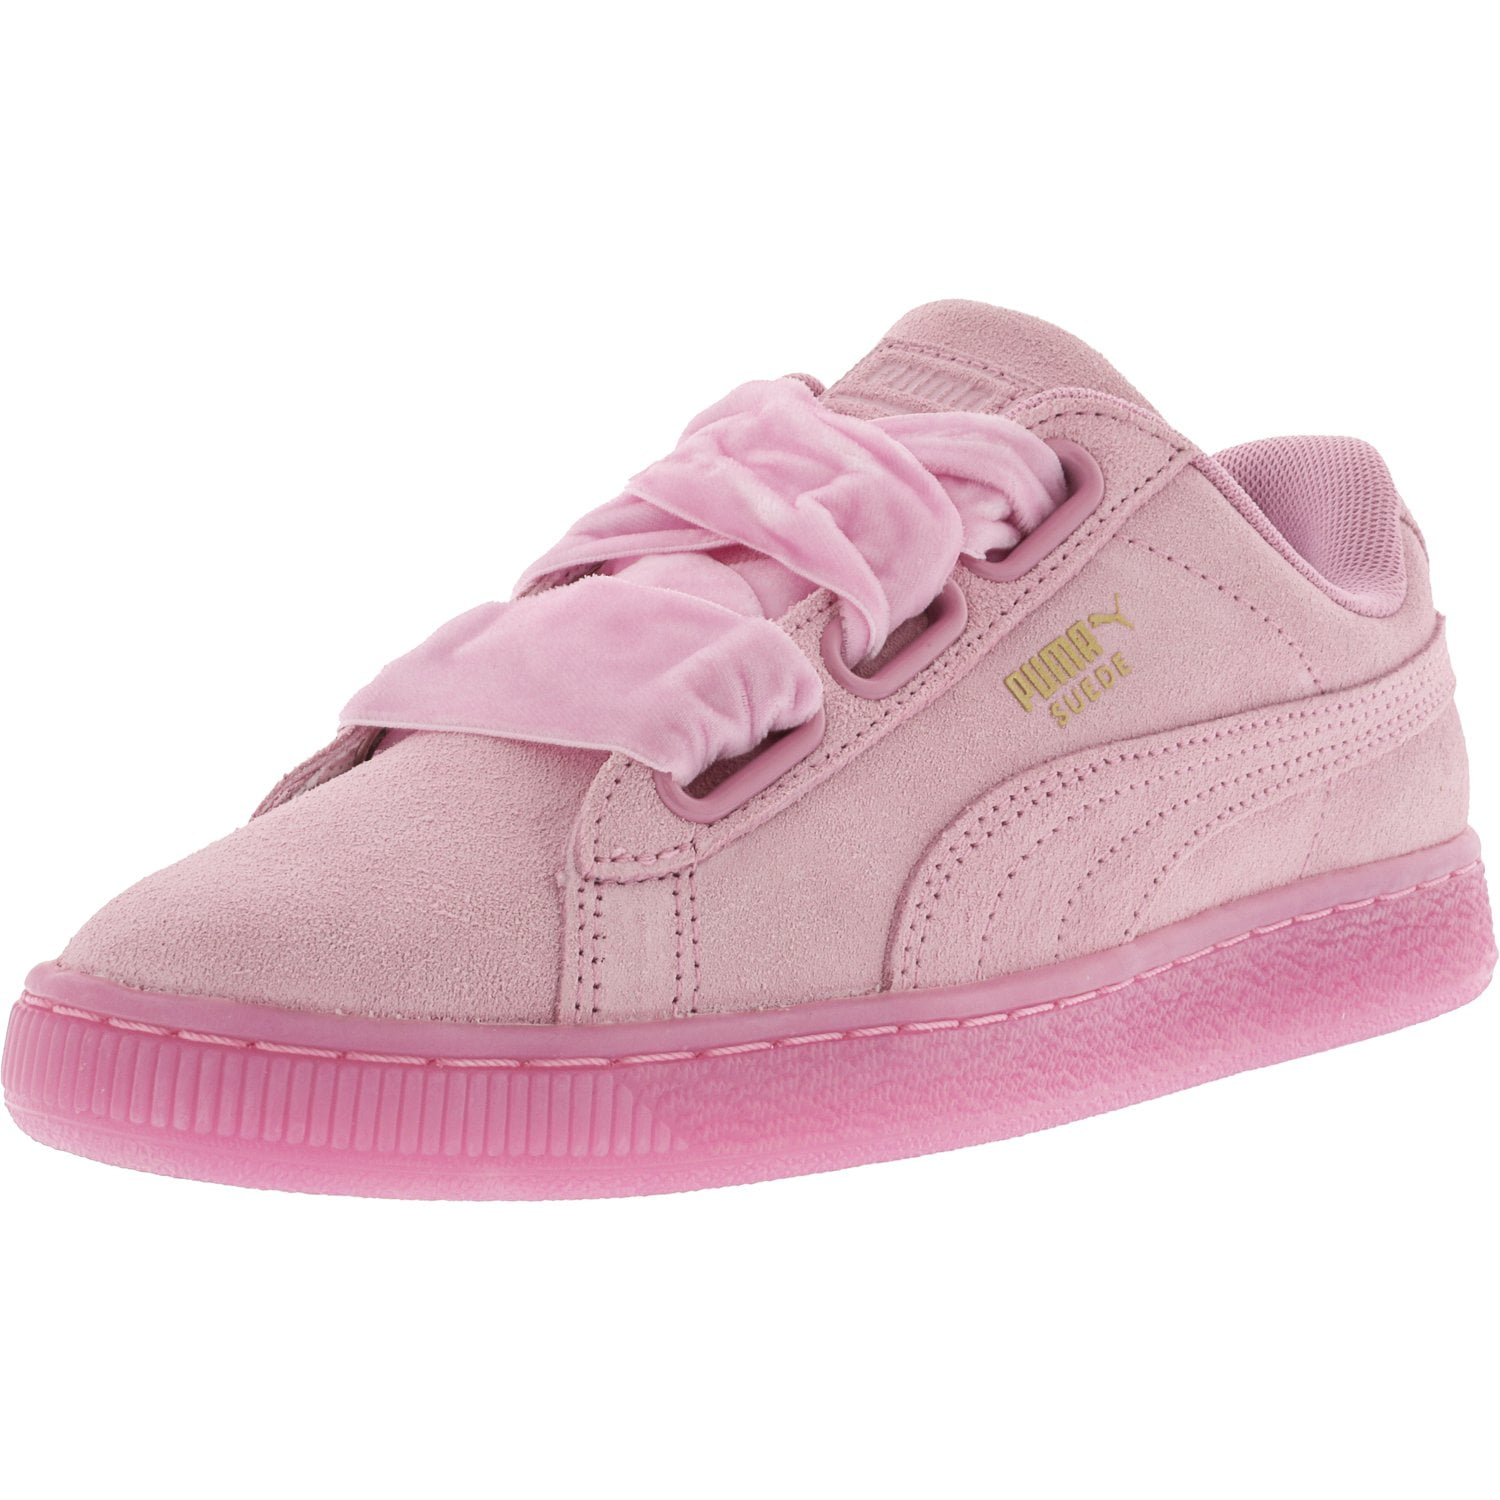 Prism 7.5M - Sneaker Women\'s Pink Ankle-High Reset Puma Suede Fashion / Heart